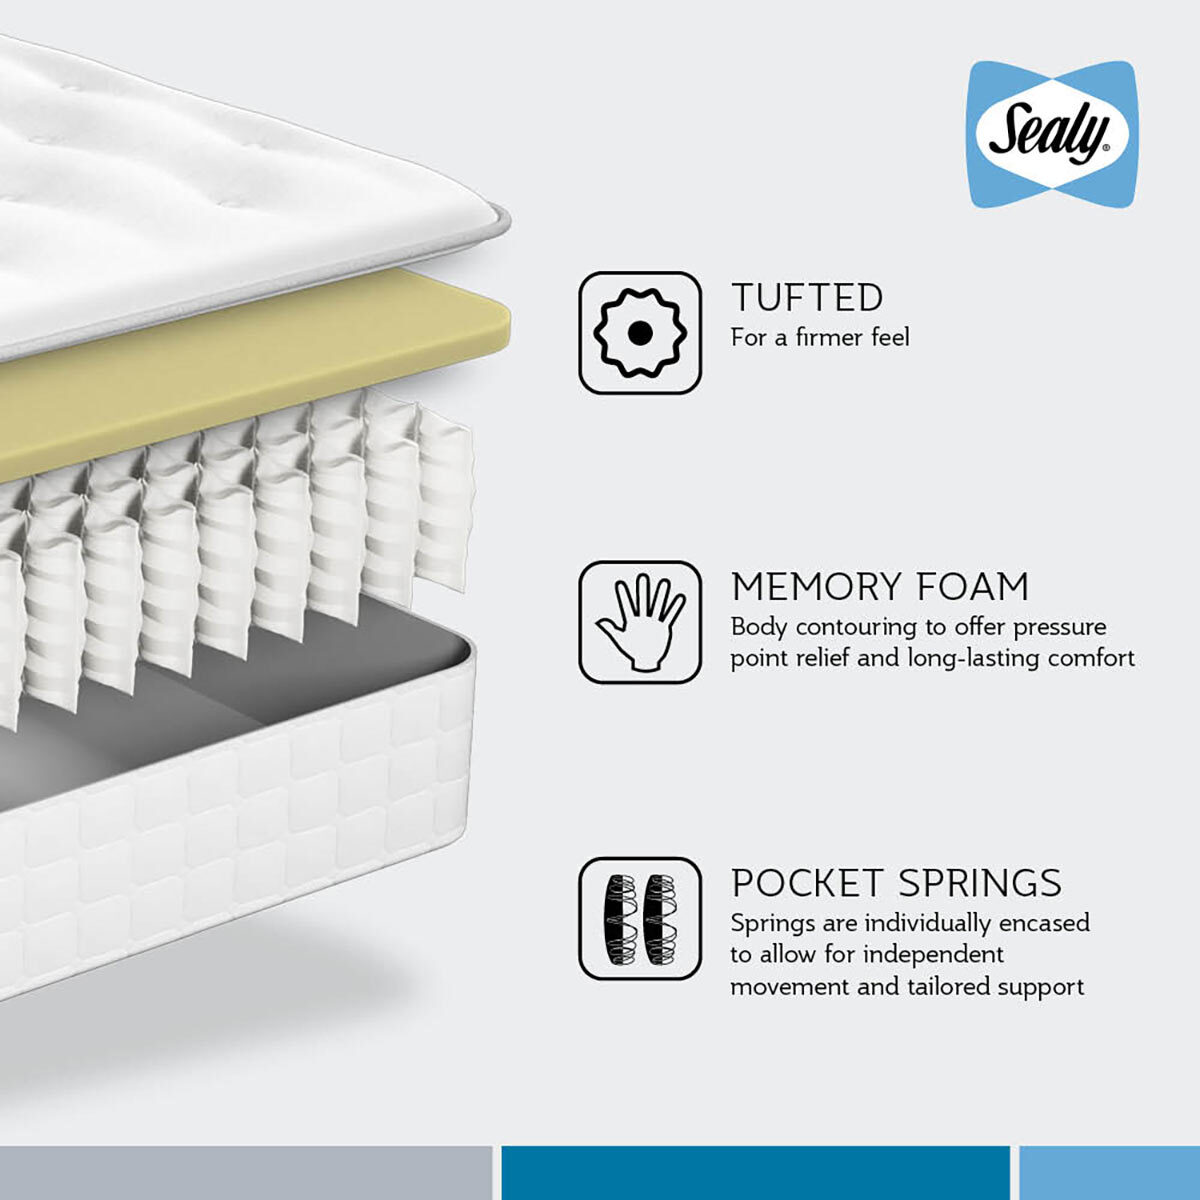 Sealy 1000 Deluxe Pocket Memory Tufted Mattress in 4 Sizes